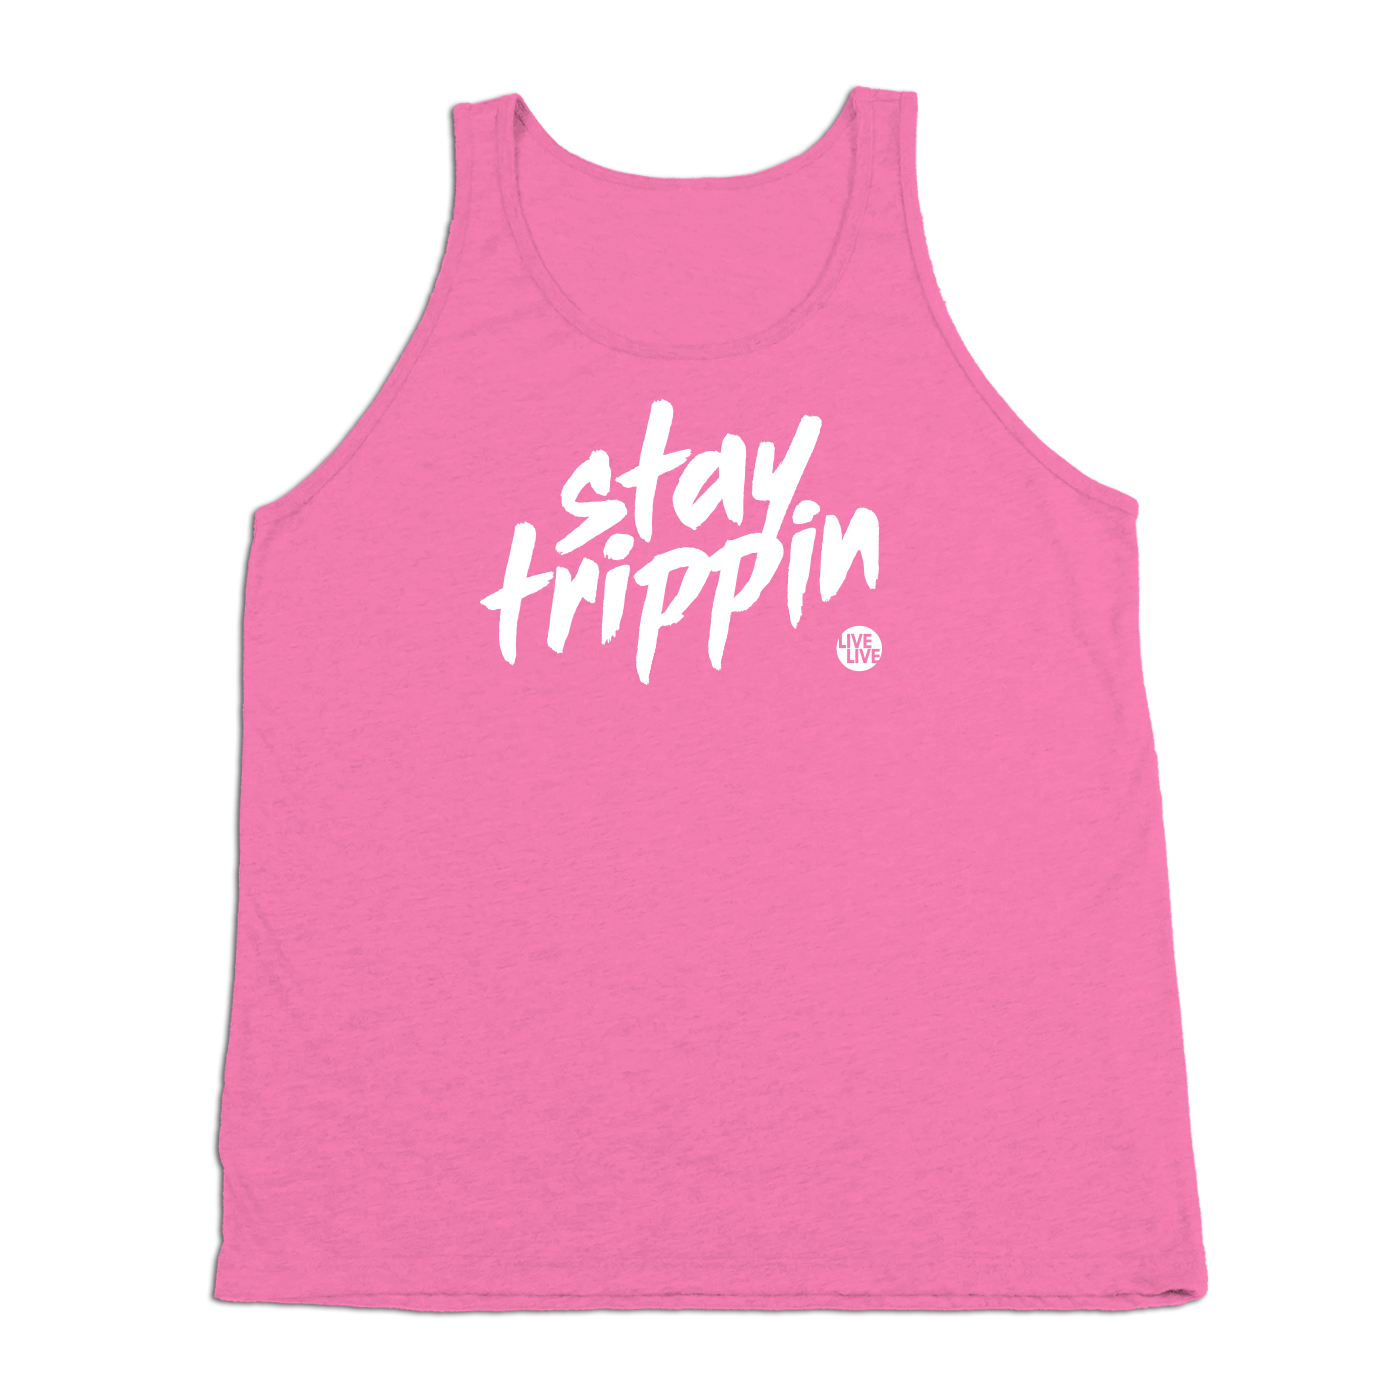 #STAYTRIPPIN Tag Tank Top - Hat Mount for GoPro